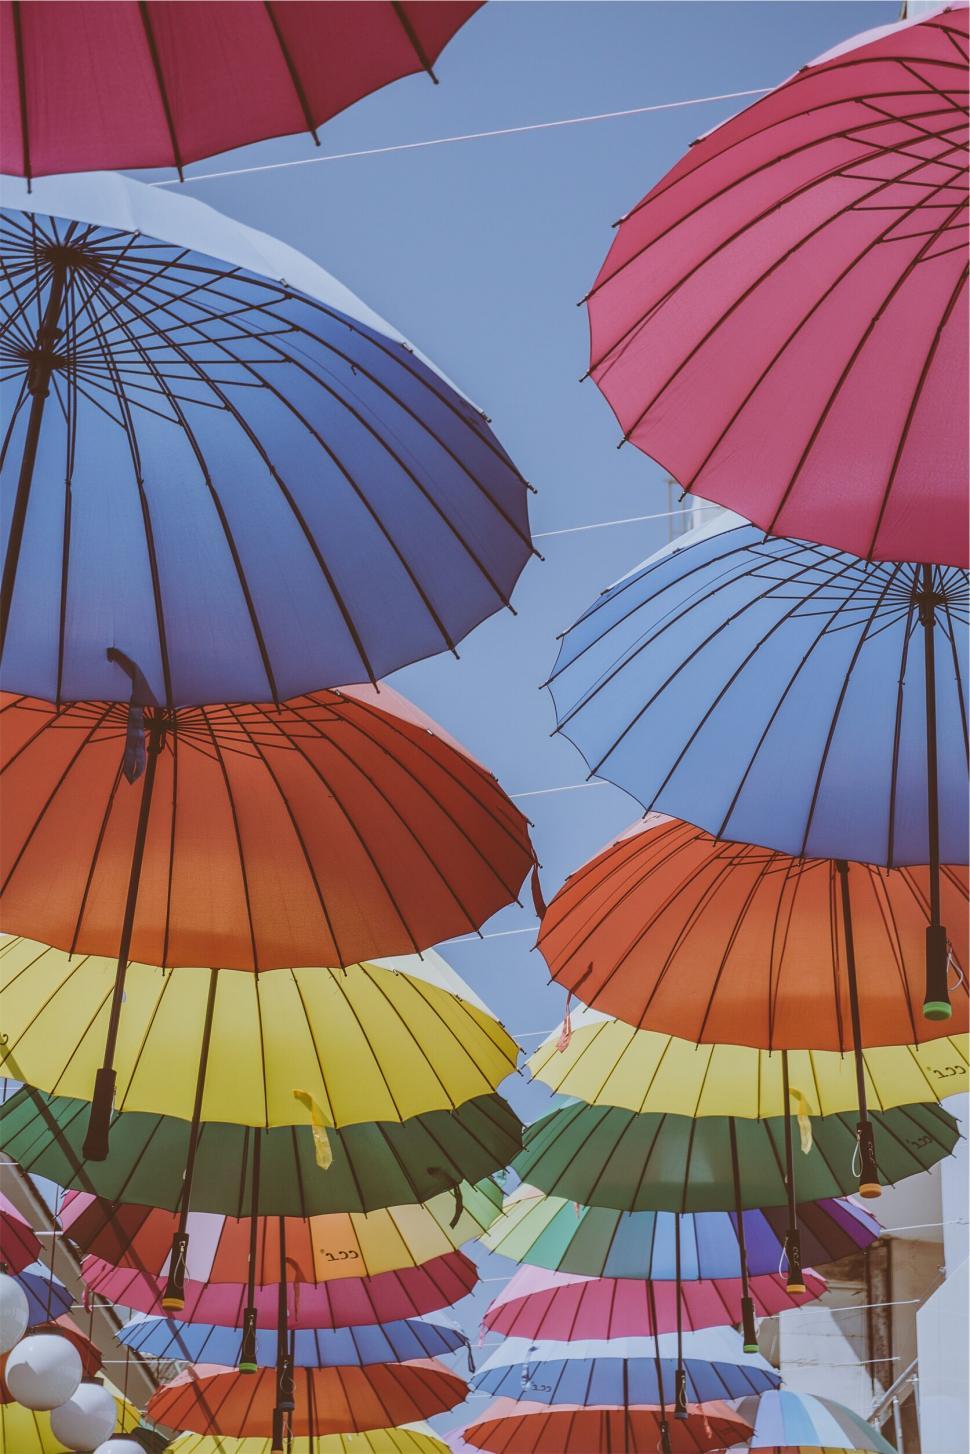 Free Image of Colorful umbrella canopy against blue sky 